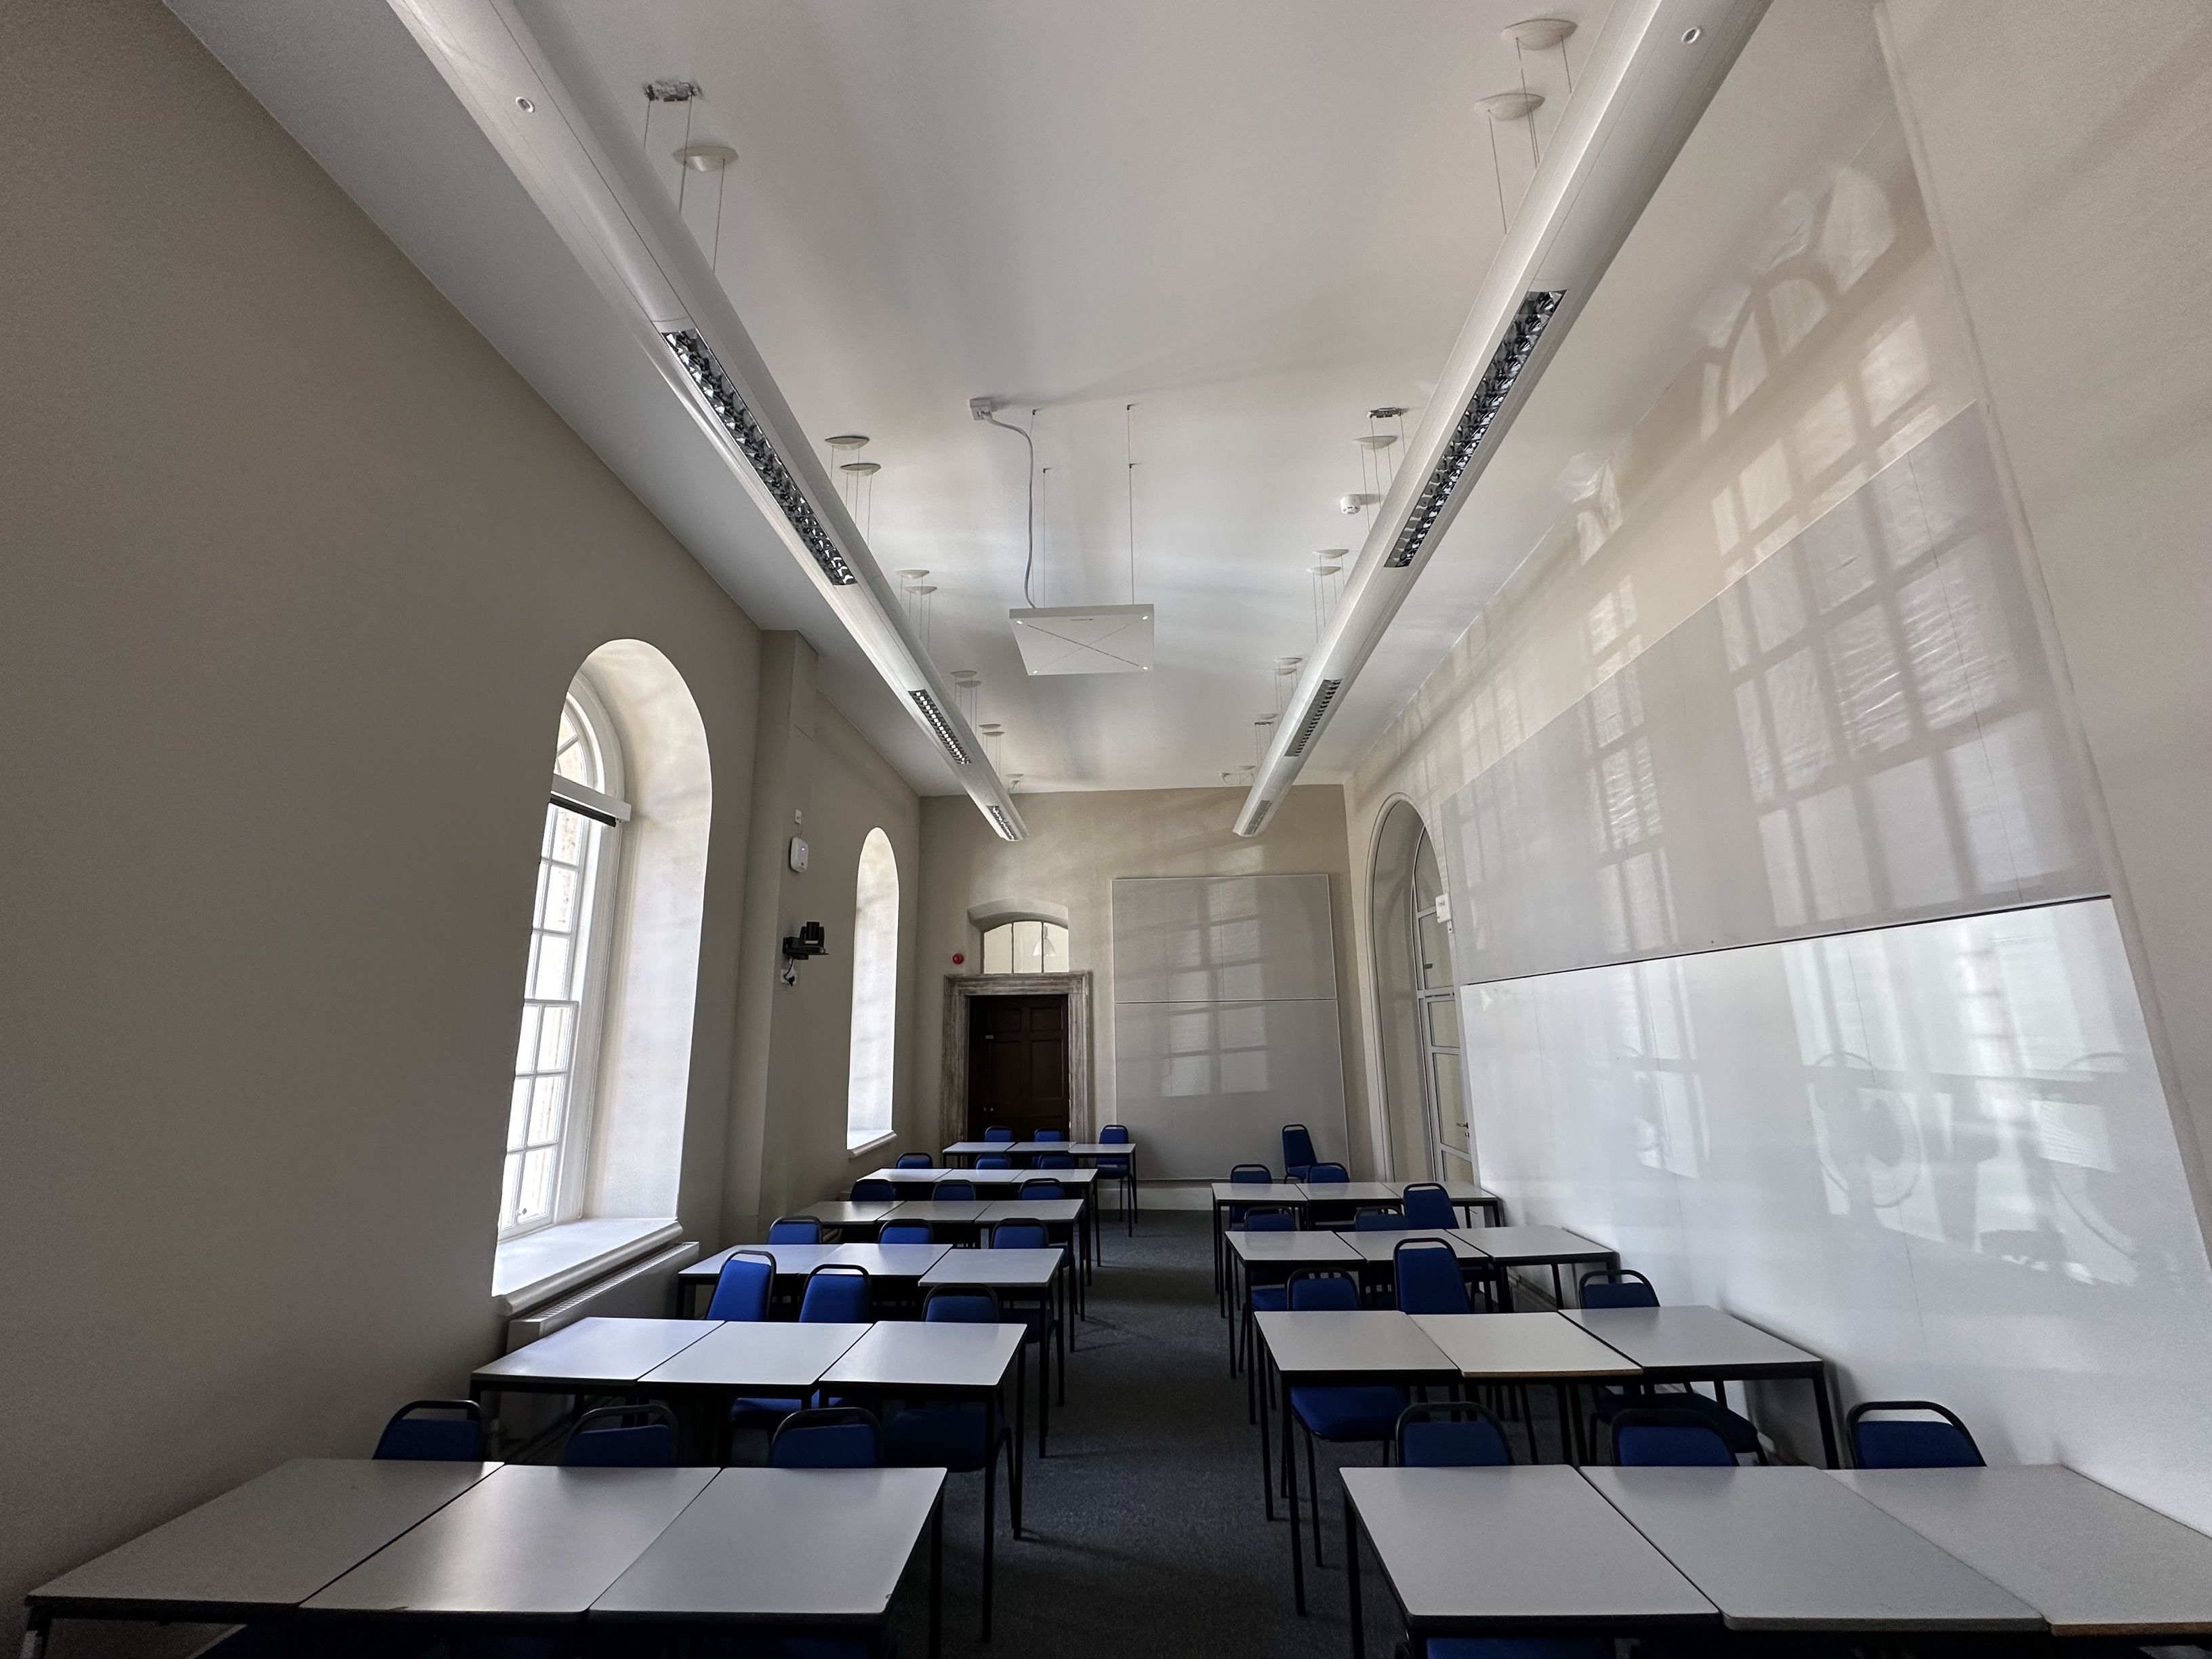 Deployed in 24 classrooms, four larger lecture theatres, and IT labs across the campuses, the team later equipped four additional smaller classrooms with the new Sennheiser’s TeamConnect Ceiling ​ Medium ceiling microphone